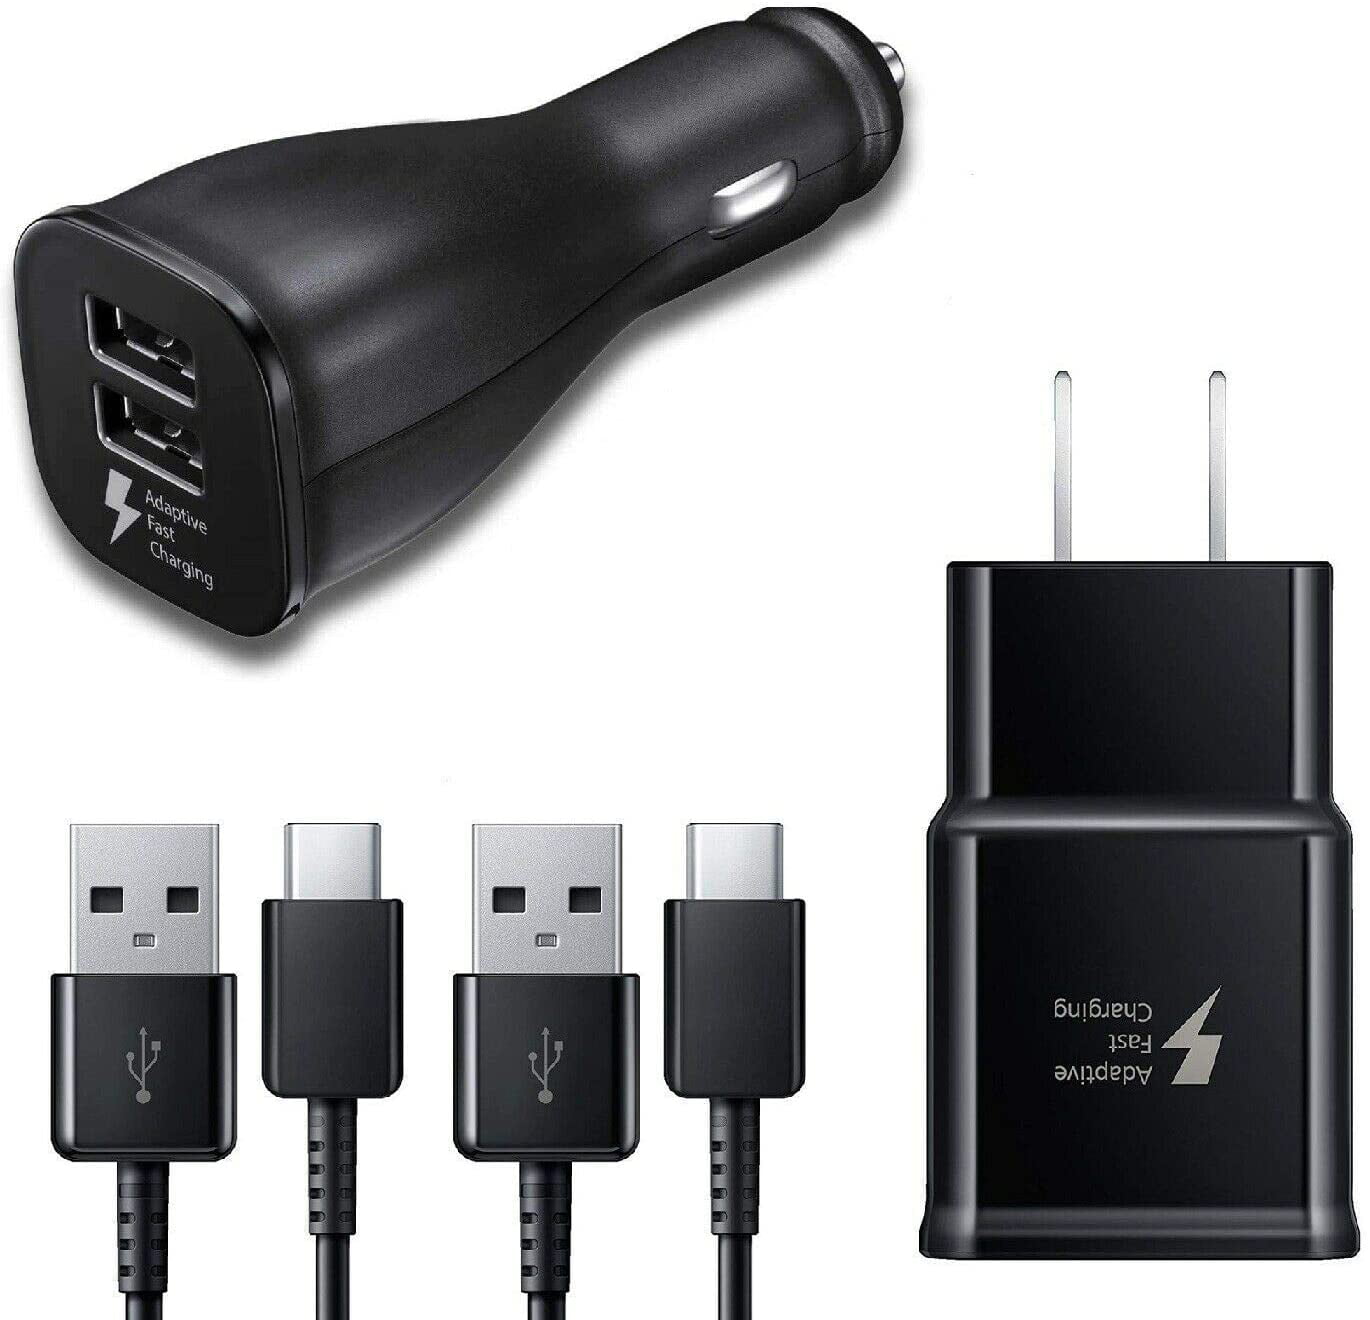 ADAPTIVE FAST TYPE C CAR CHARGER FOR SAMSUNG Galaxy Note 7 Galaxy Note 8 